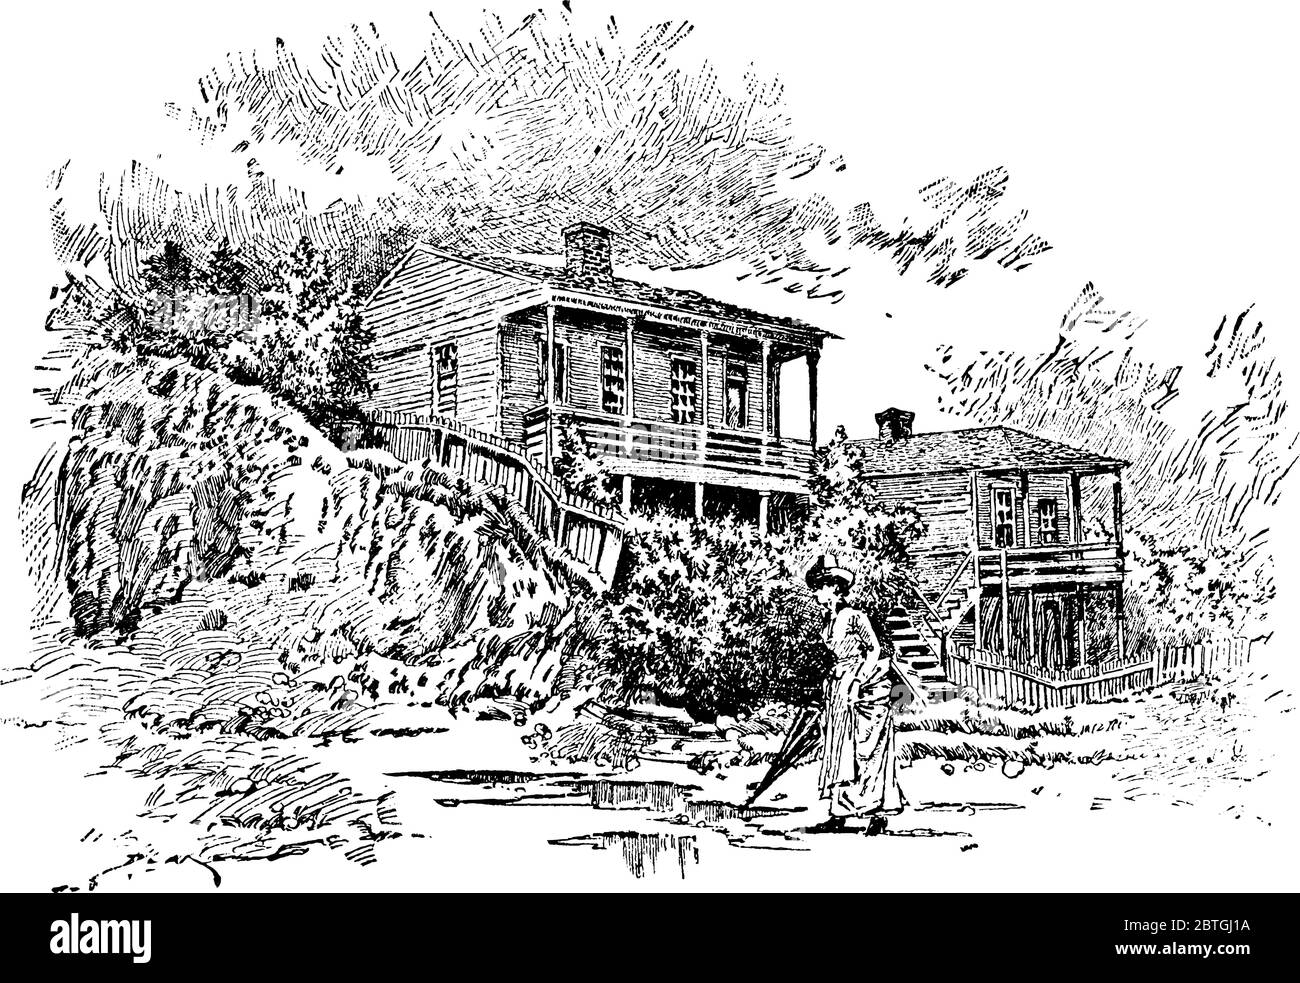 Pemberton's Headquarters, a two-story brick house that served as the headquarters for Confederate General John C. Pemberton, vintage line drawing or e Stock Vector